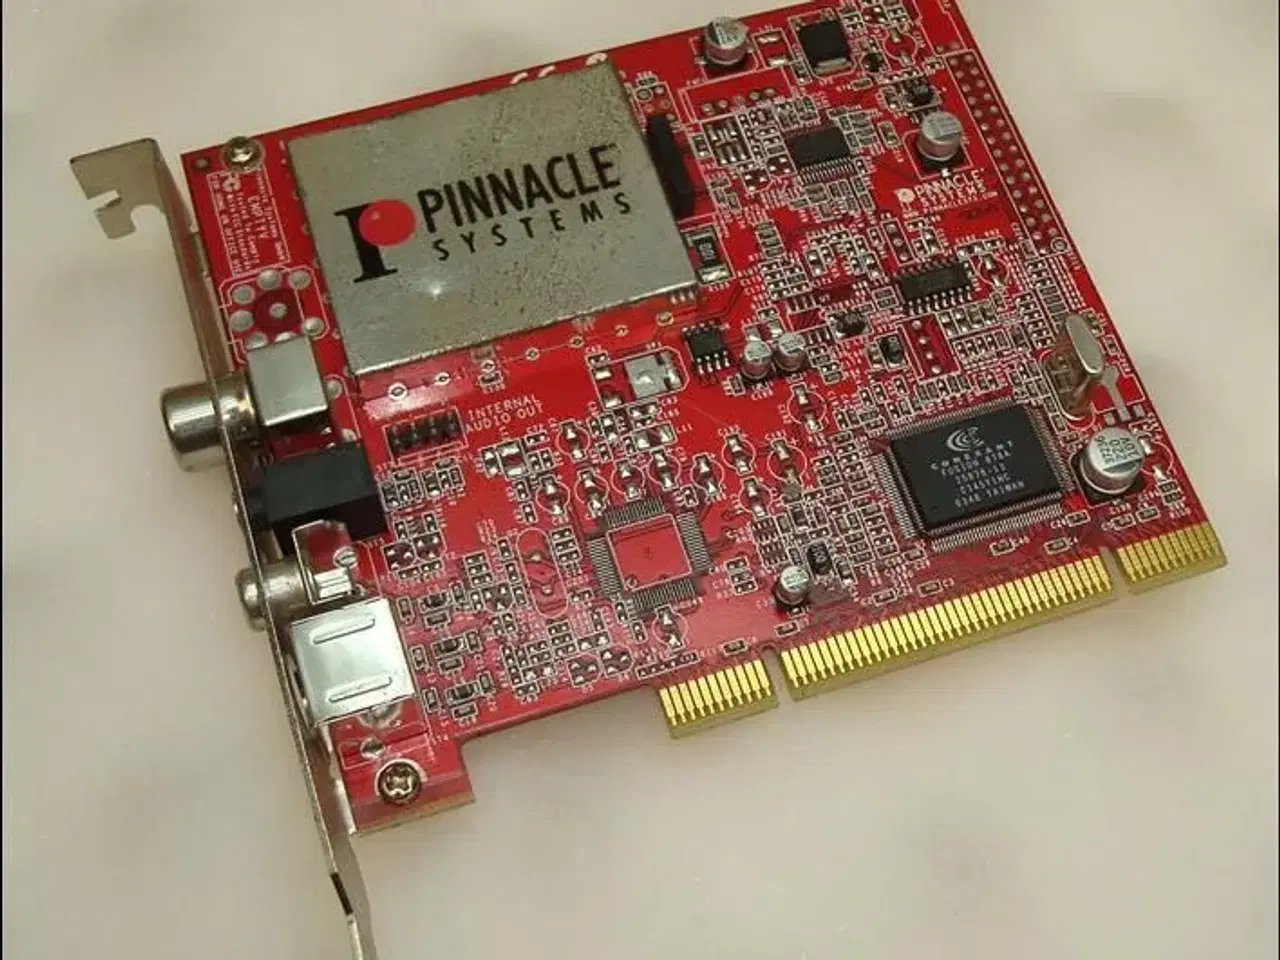 Billede 1 - Pinnacle Systems EMPTYV-51014521-2.2A PCI TV Tuner